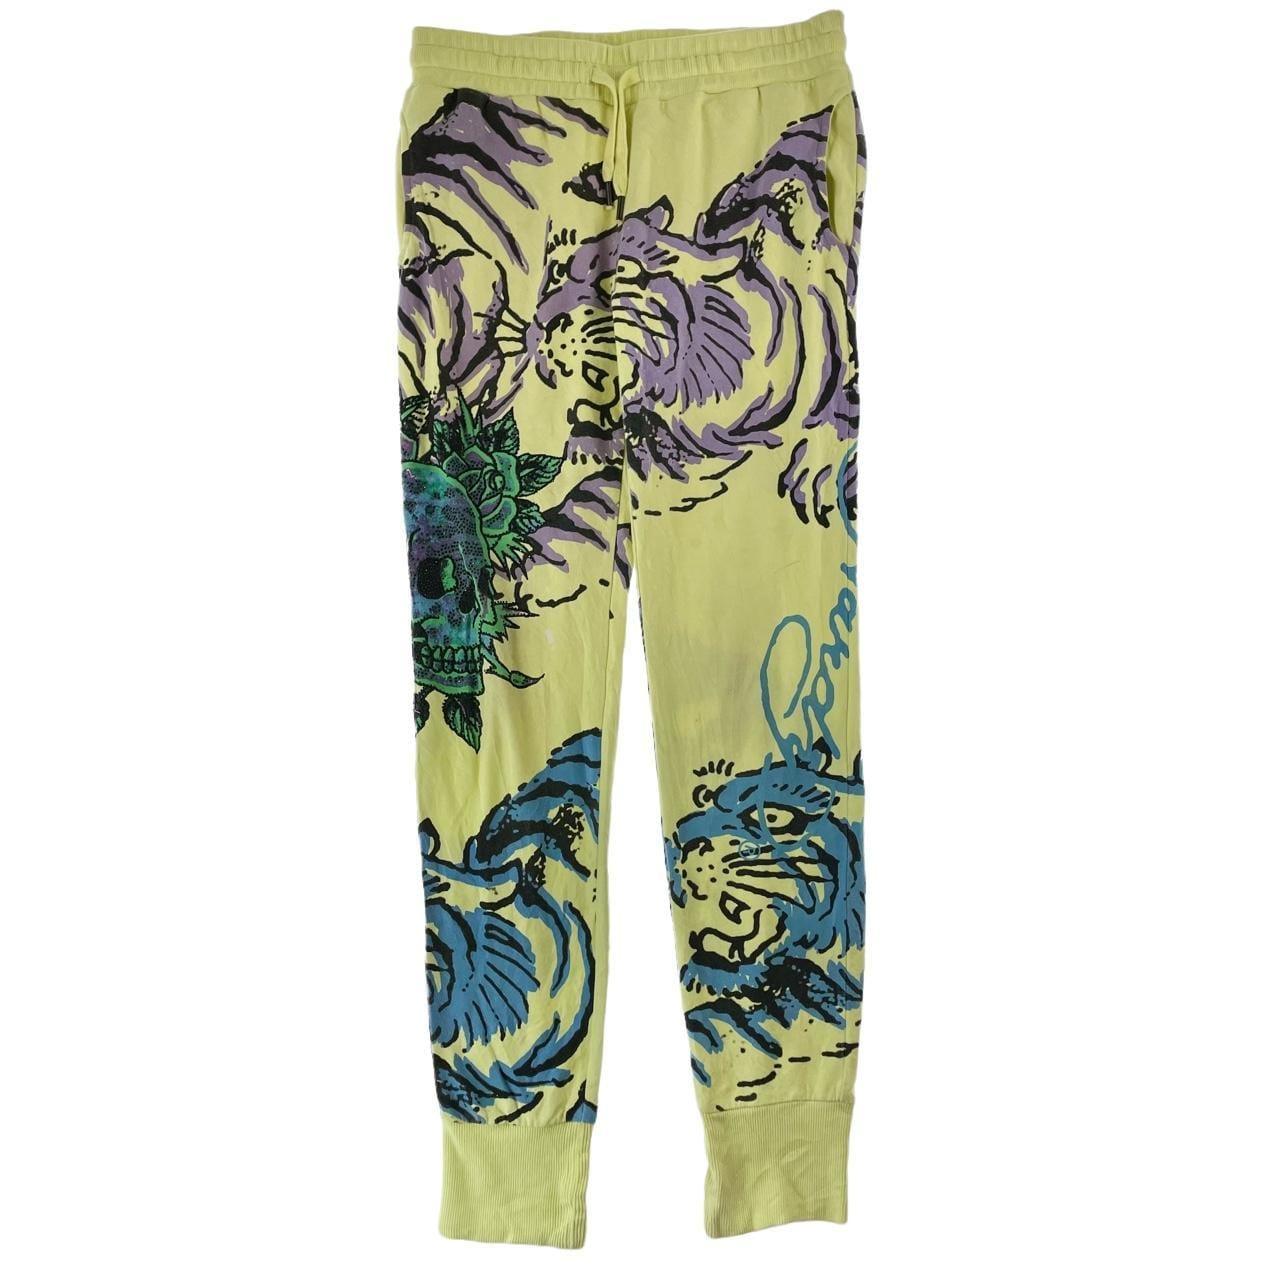 Ed Hardy tiger joggers size S - Known Source